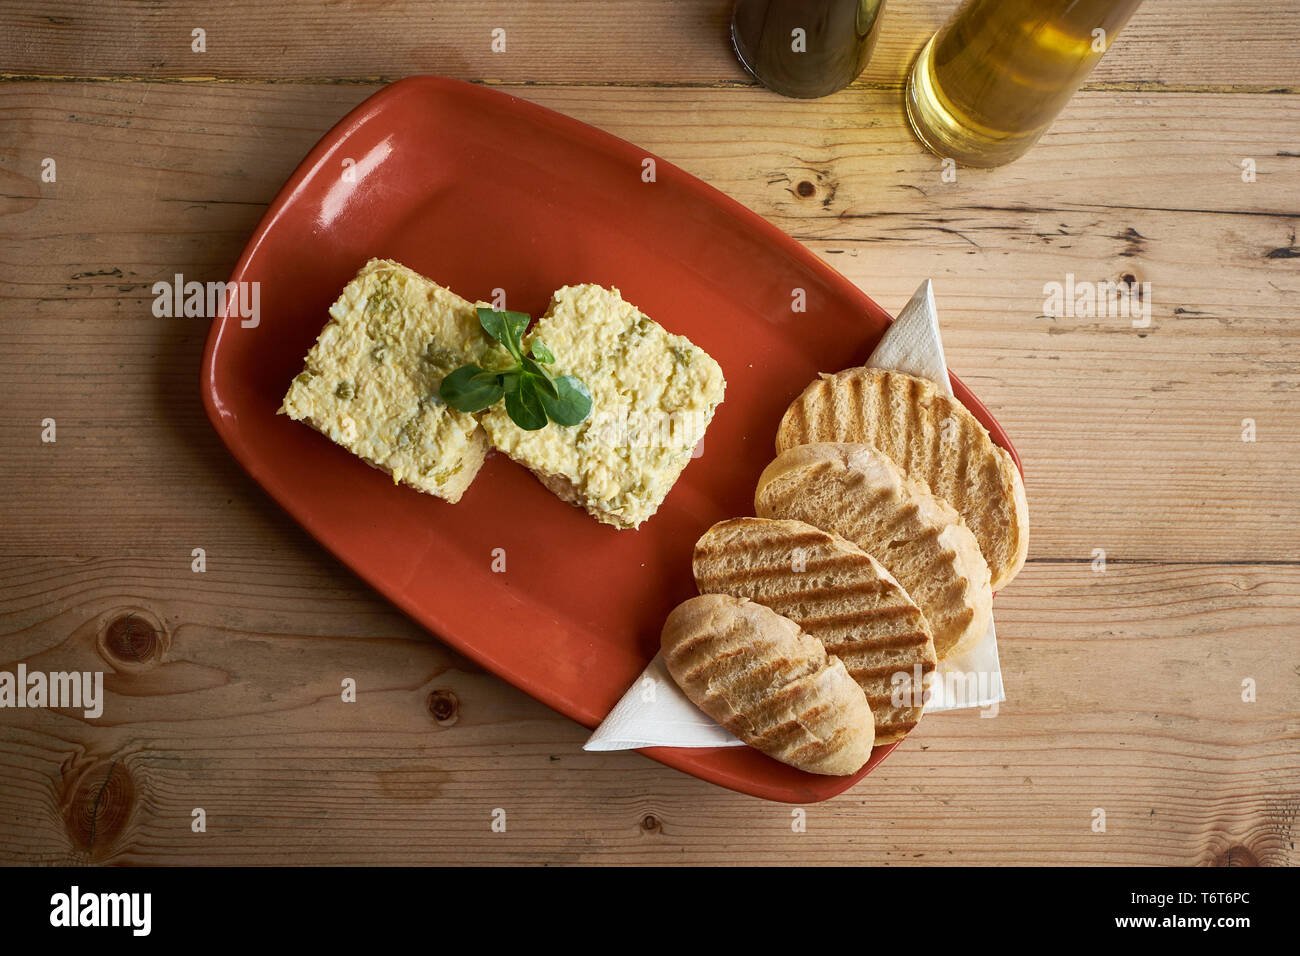 Olivieh Salad on a red plate and wooden table Stock Photo